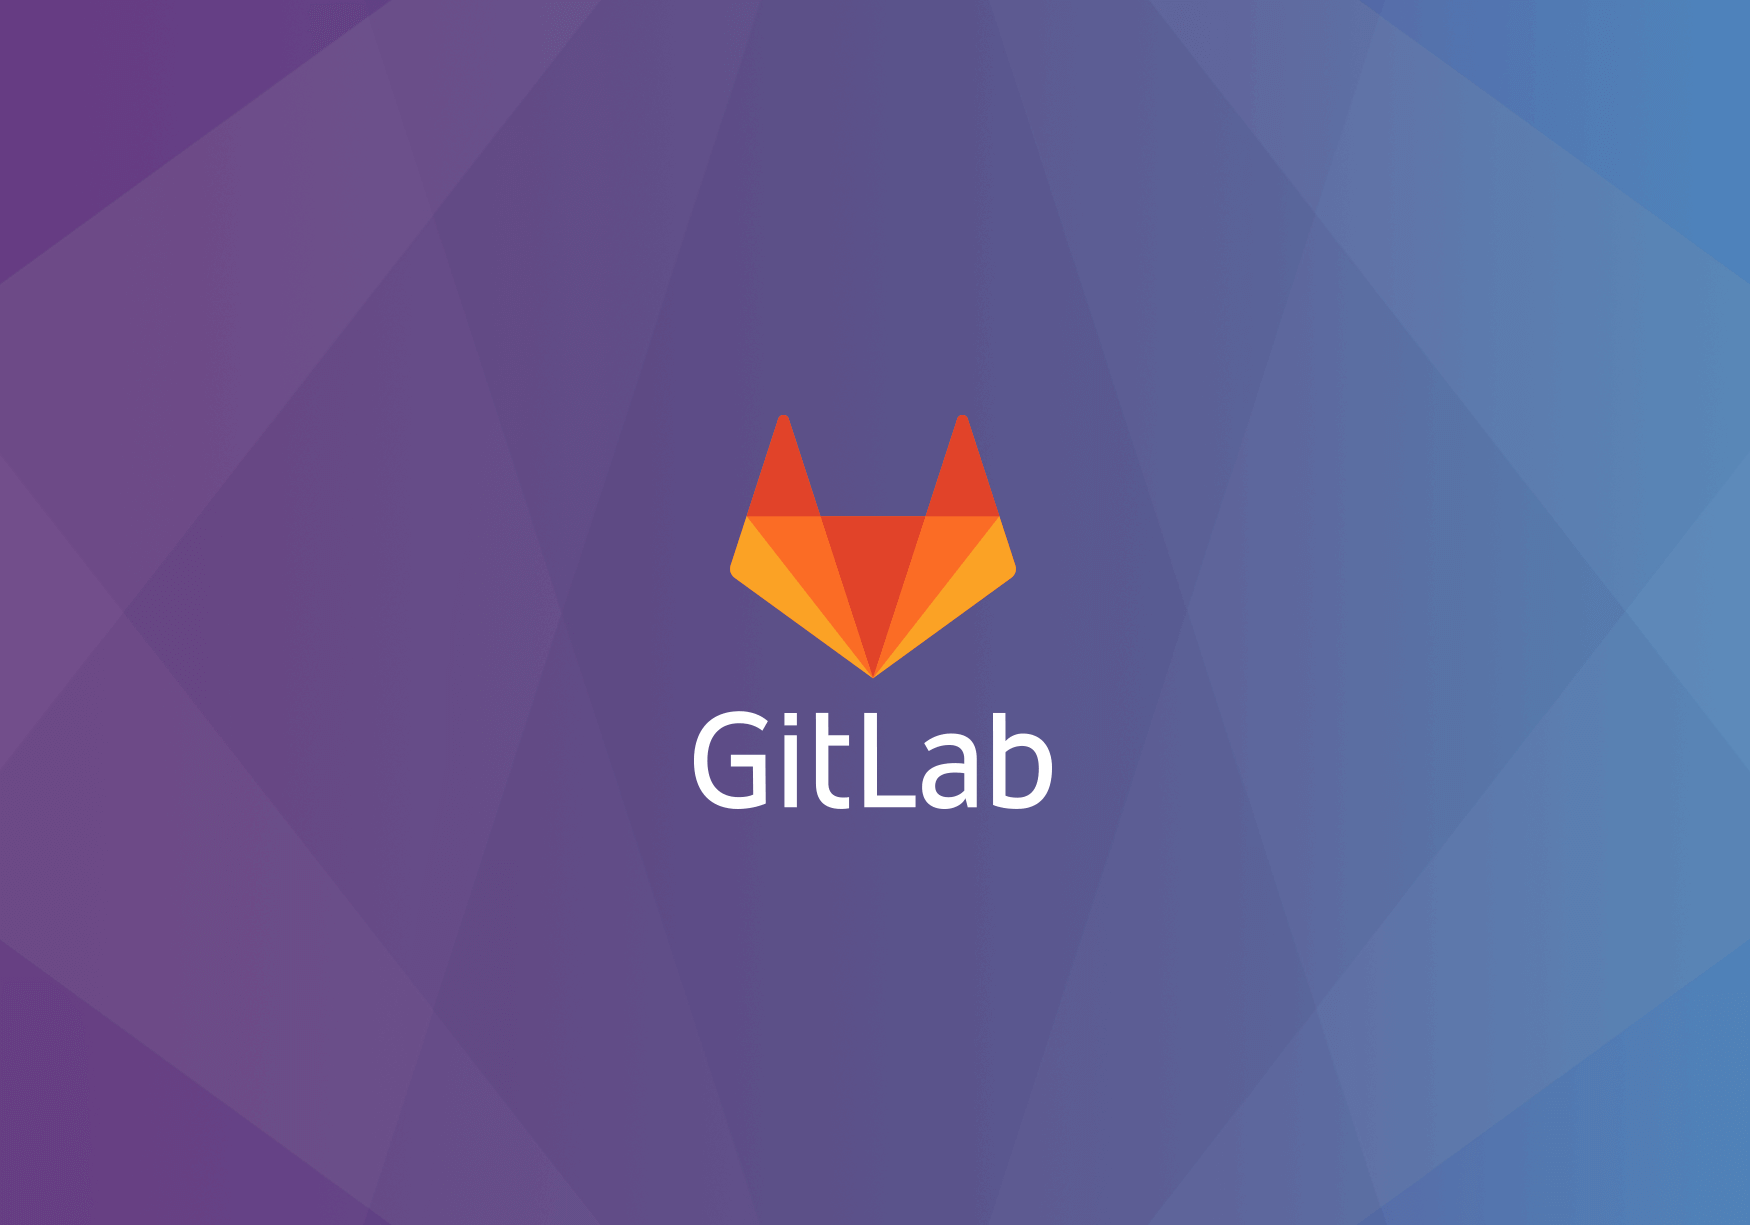 GitLab - Clone a repository when 2FA enabled